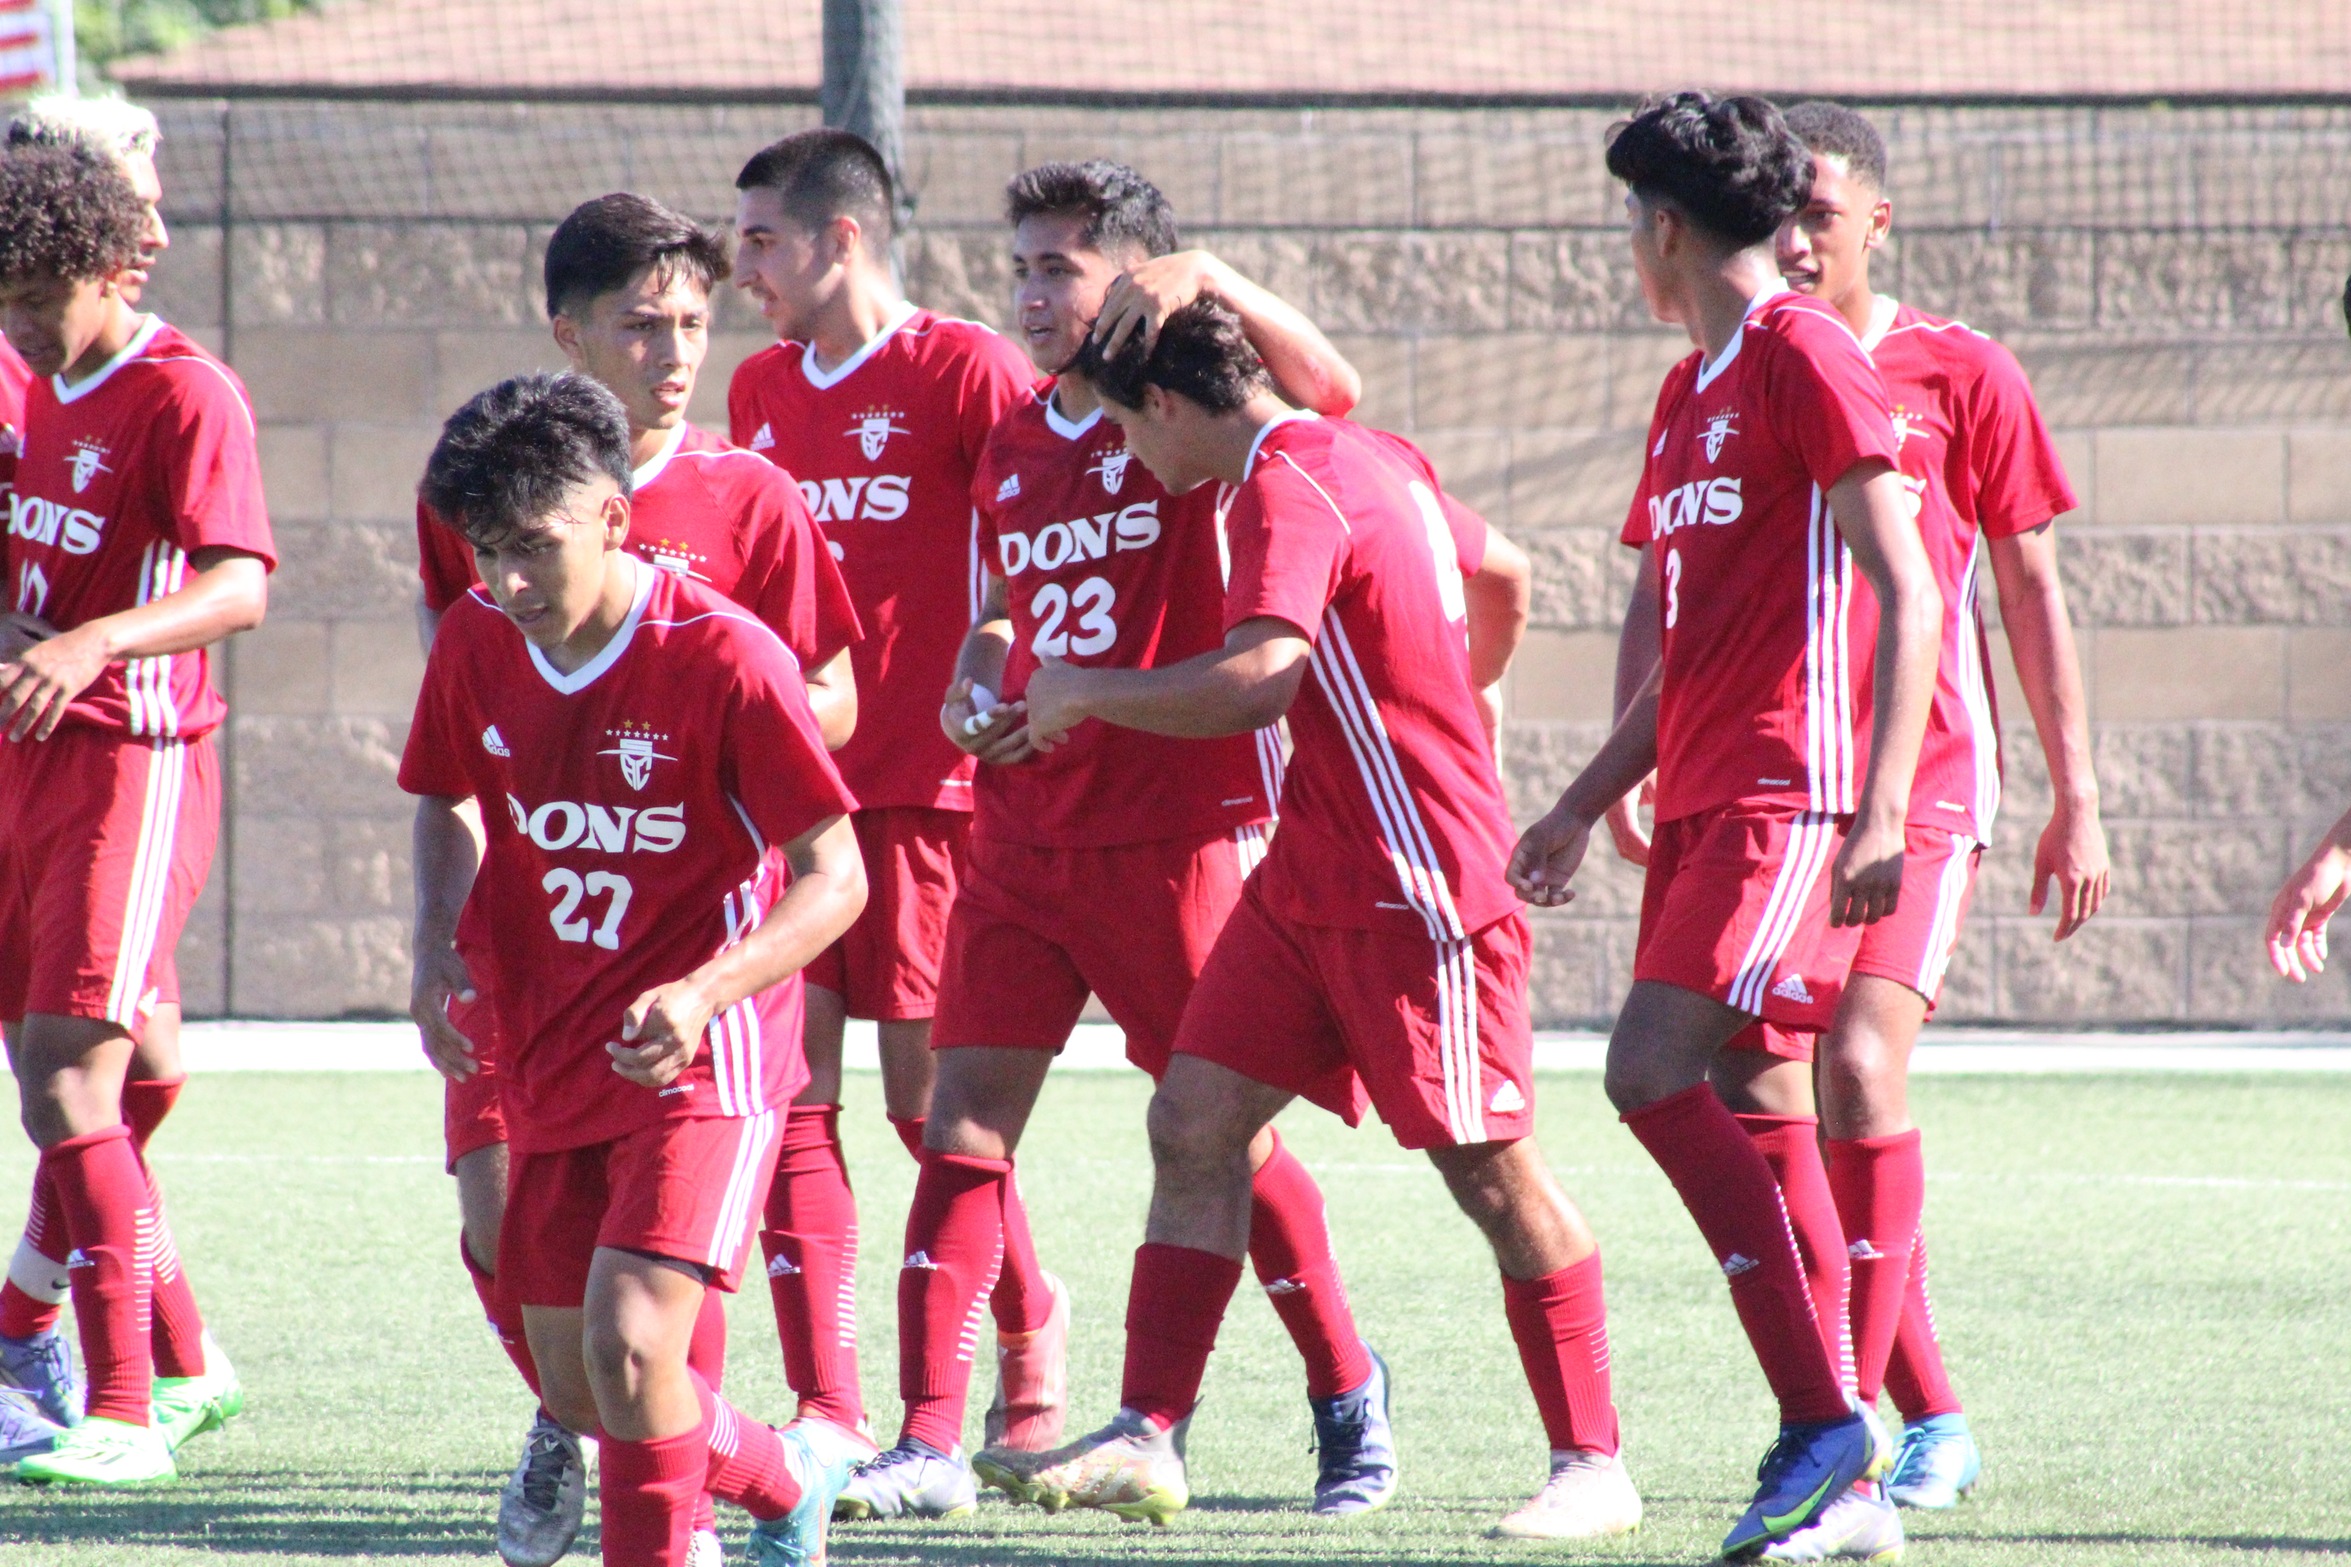 SAC Men’s Soccer Collects First Win With 2-0 Shutout Over ELAC